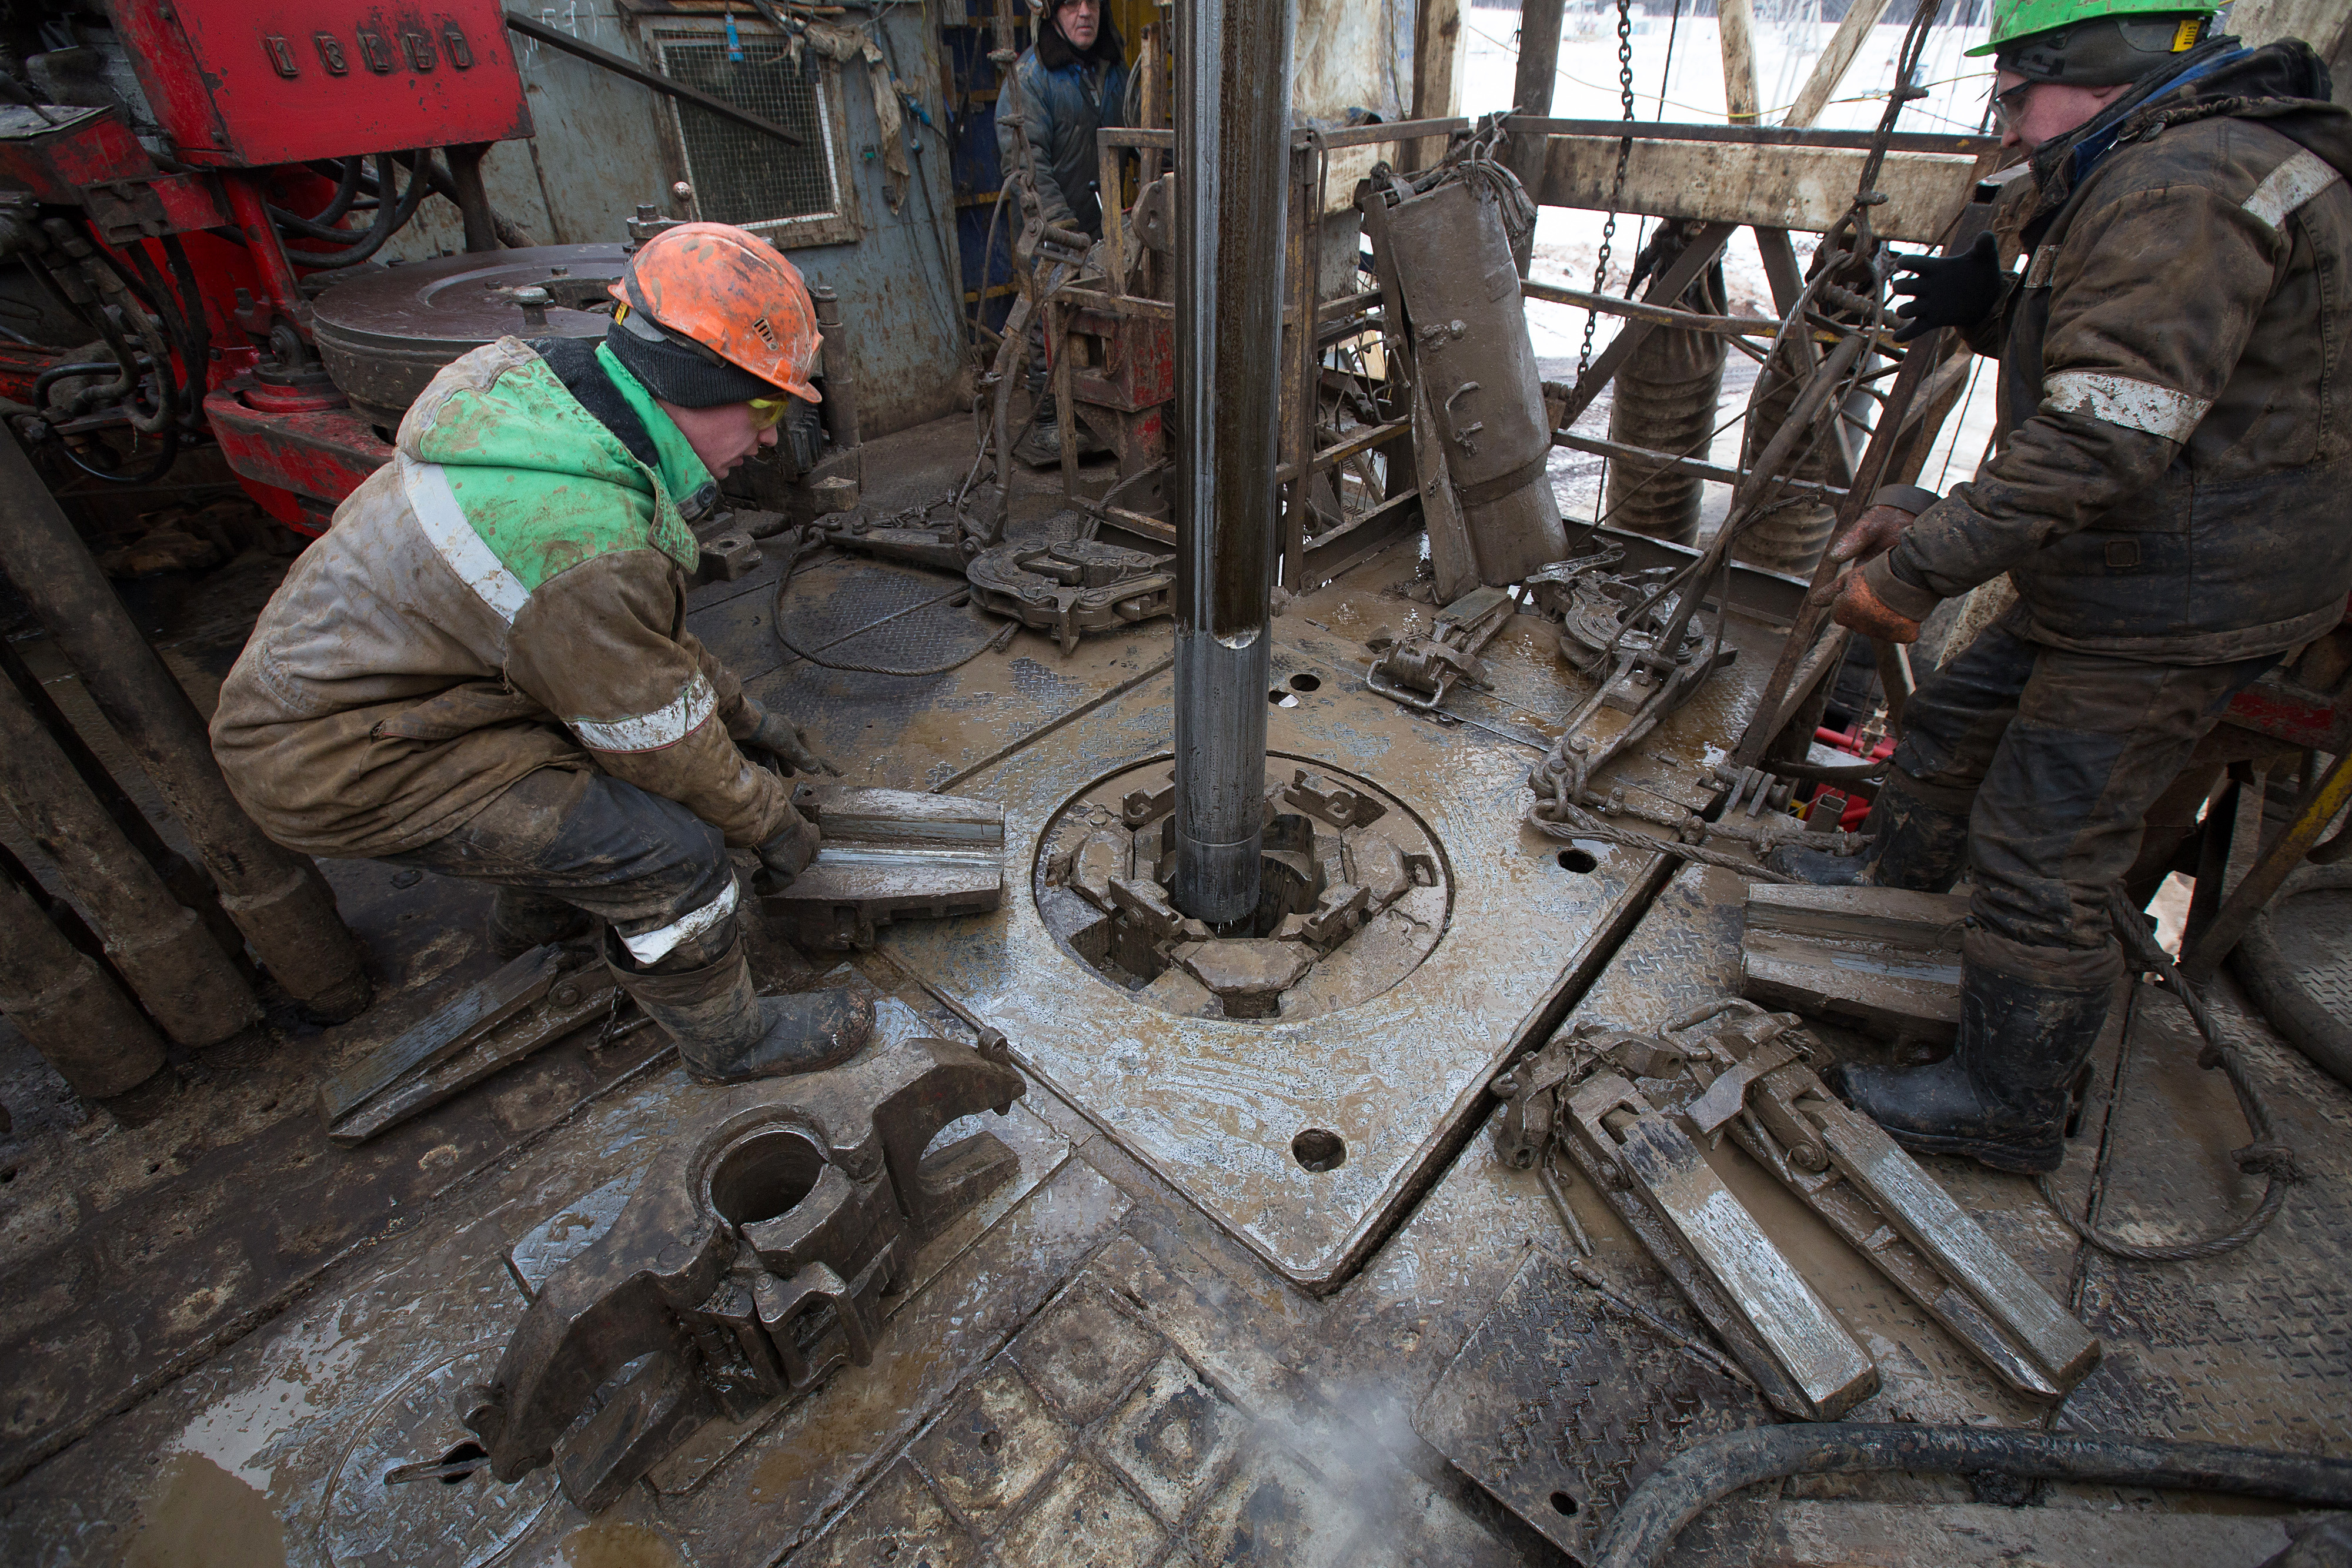 Oil workers adjust a pipe section at the turntable on an oil derrick during drilling operations by Targin JSC, a unit of Sistema JSFC, in an oilfield operated by Bashneft PAO in the village of Otrada, 150kms from Ufa, Russia, on Saturday, March 5, 2016. (Andrey Rudakov—Bloomberg/Getty Images)